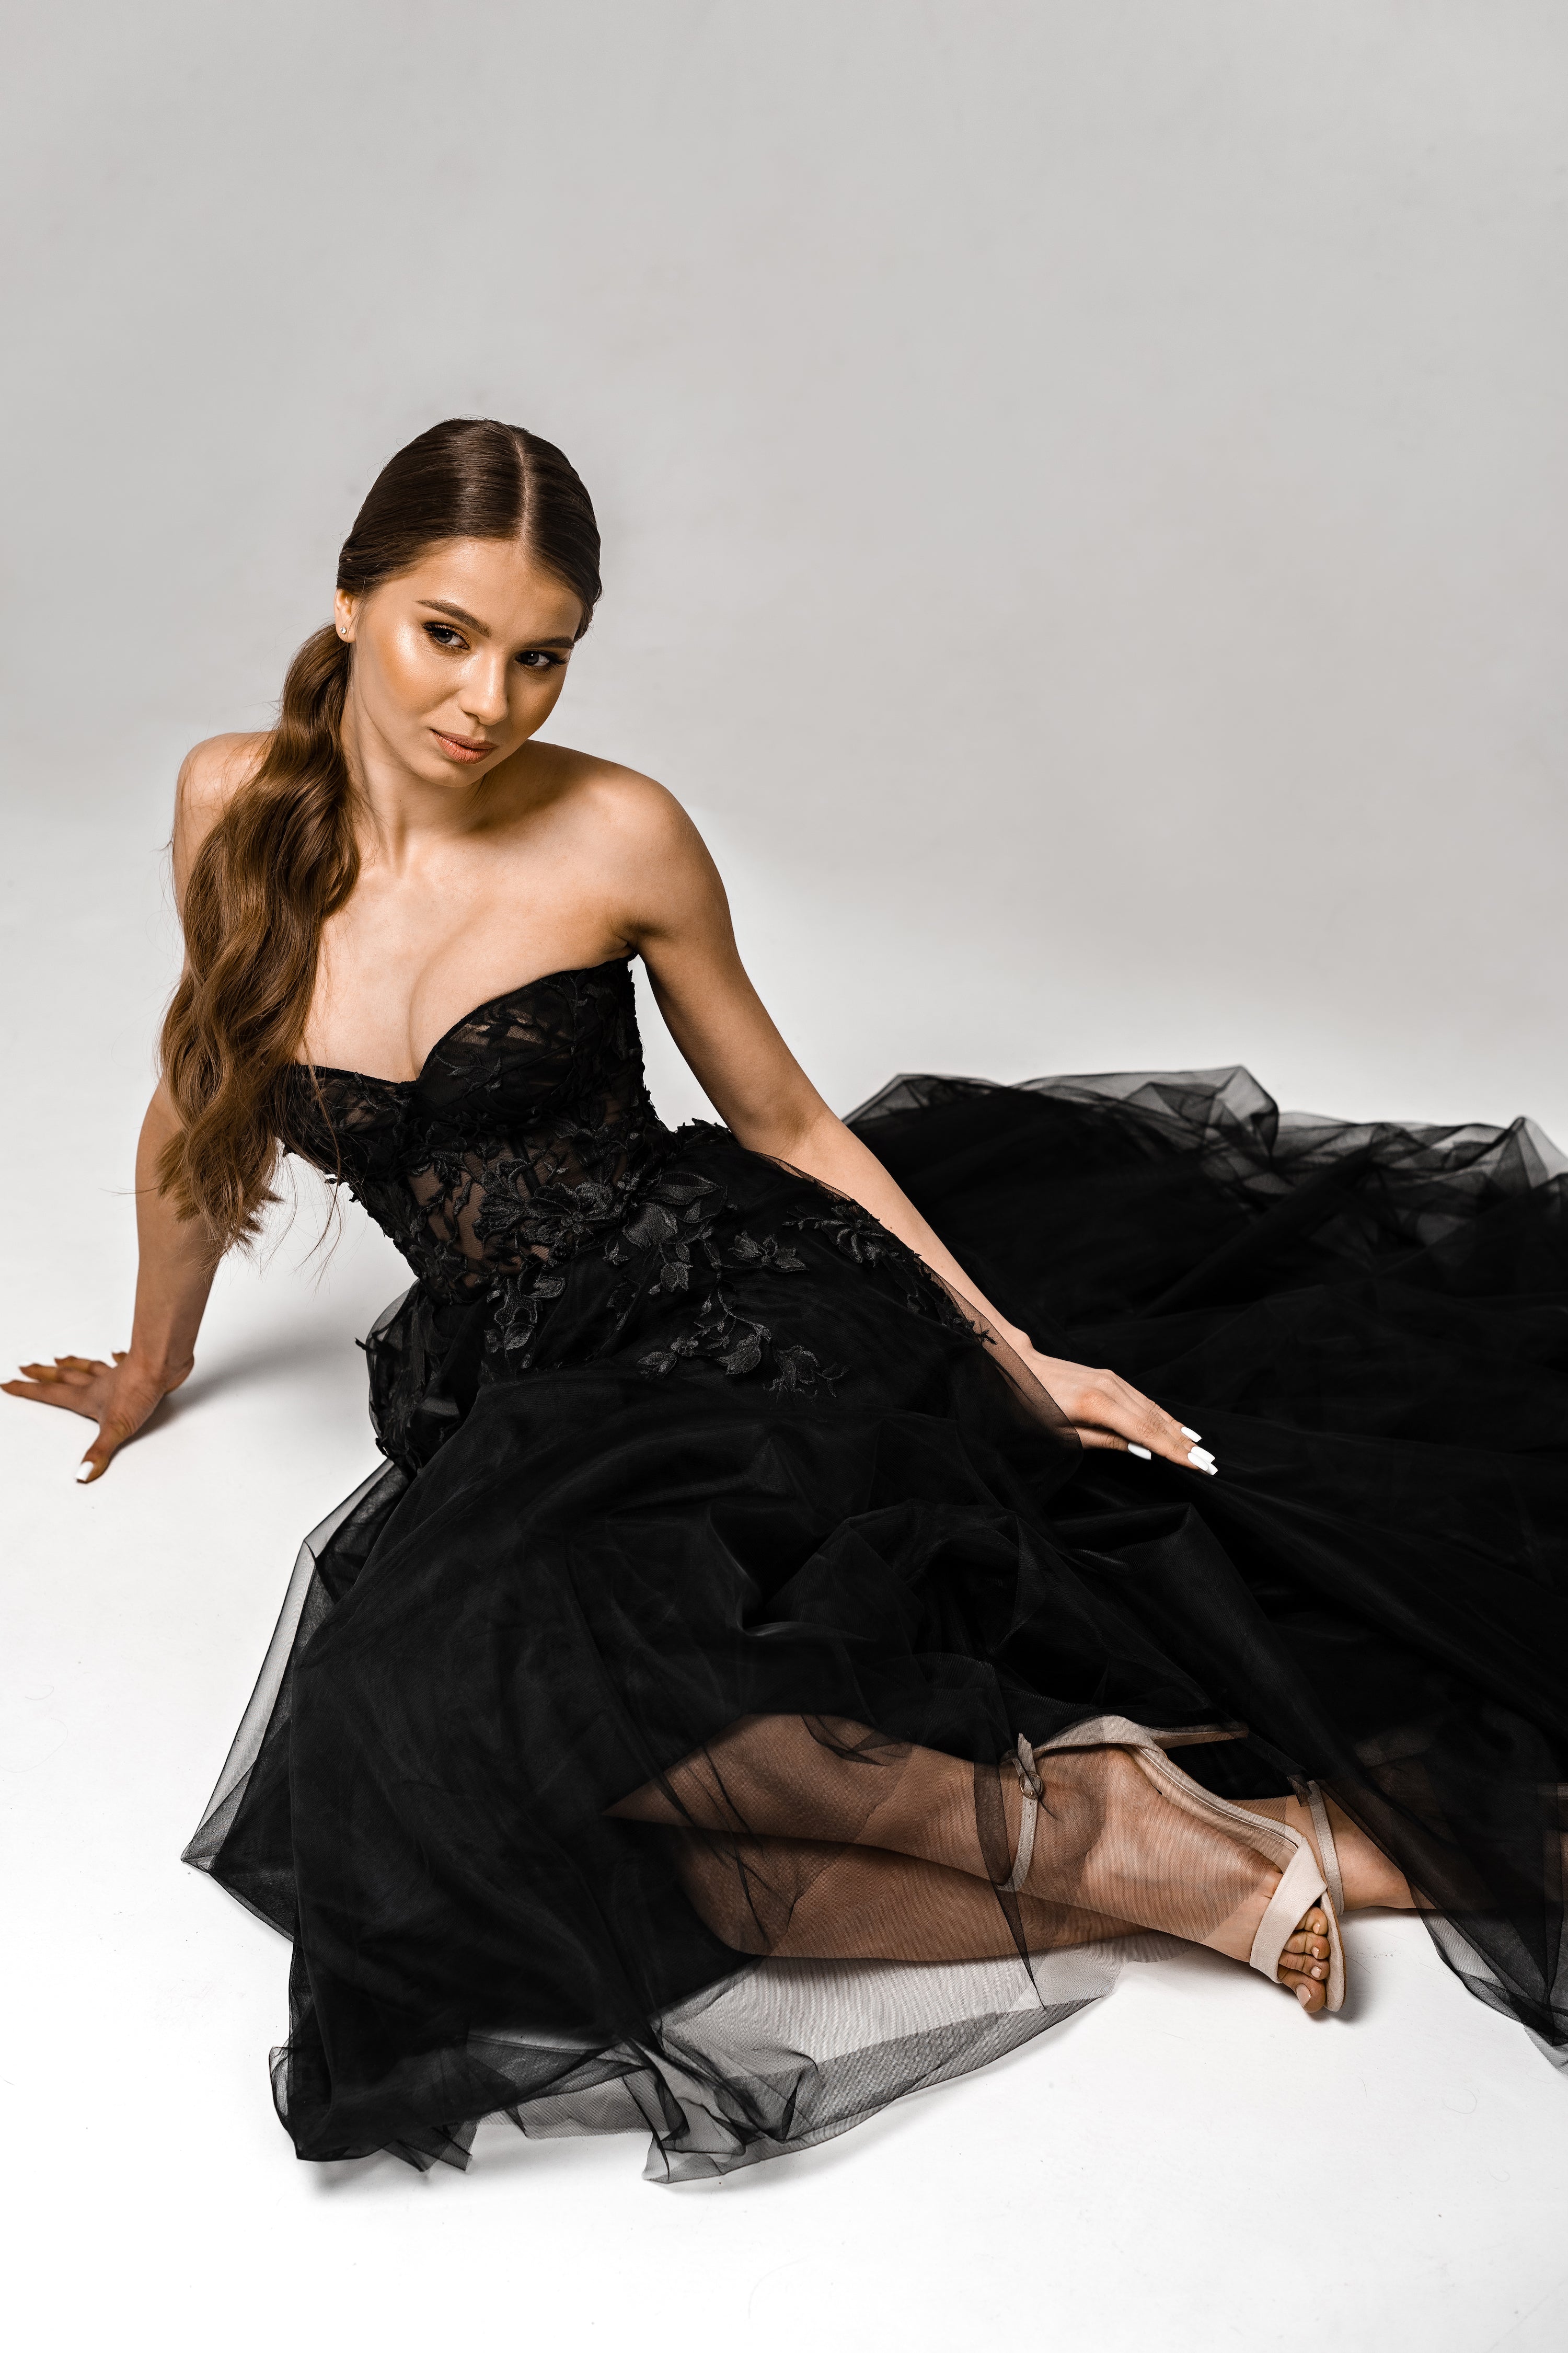 "Demia" Black Corset Wedding Dress with Lace-Adorned Mesh Skirt